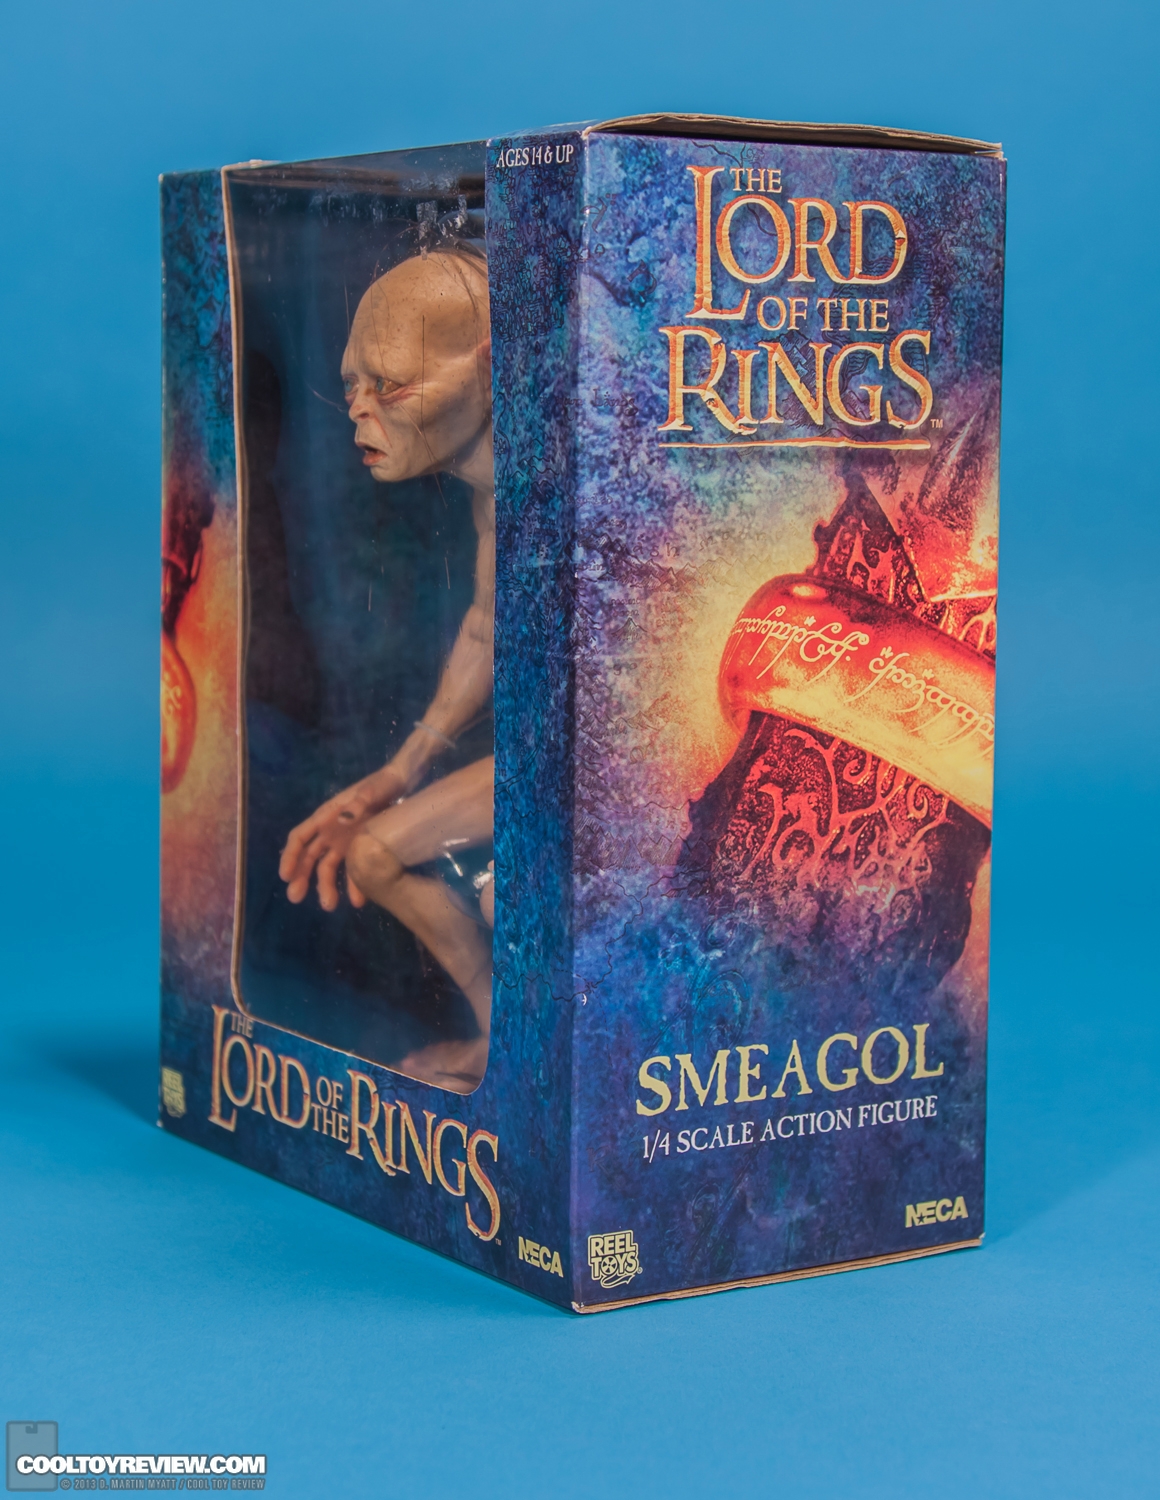 Smeagol_Lord_Of_The_Rings_NECA-017.jpg